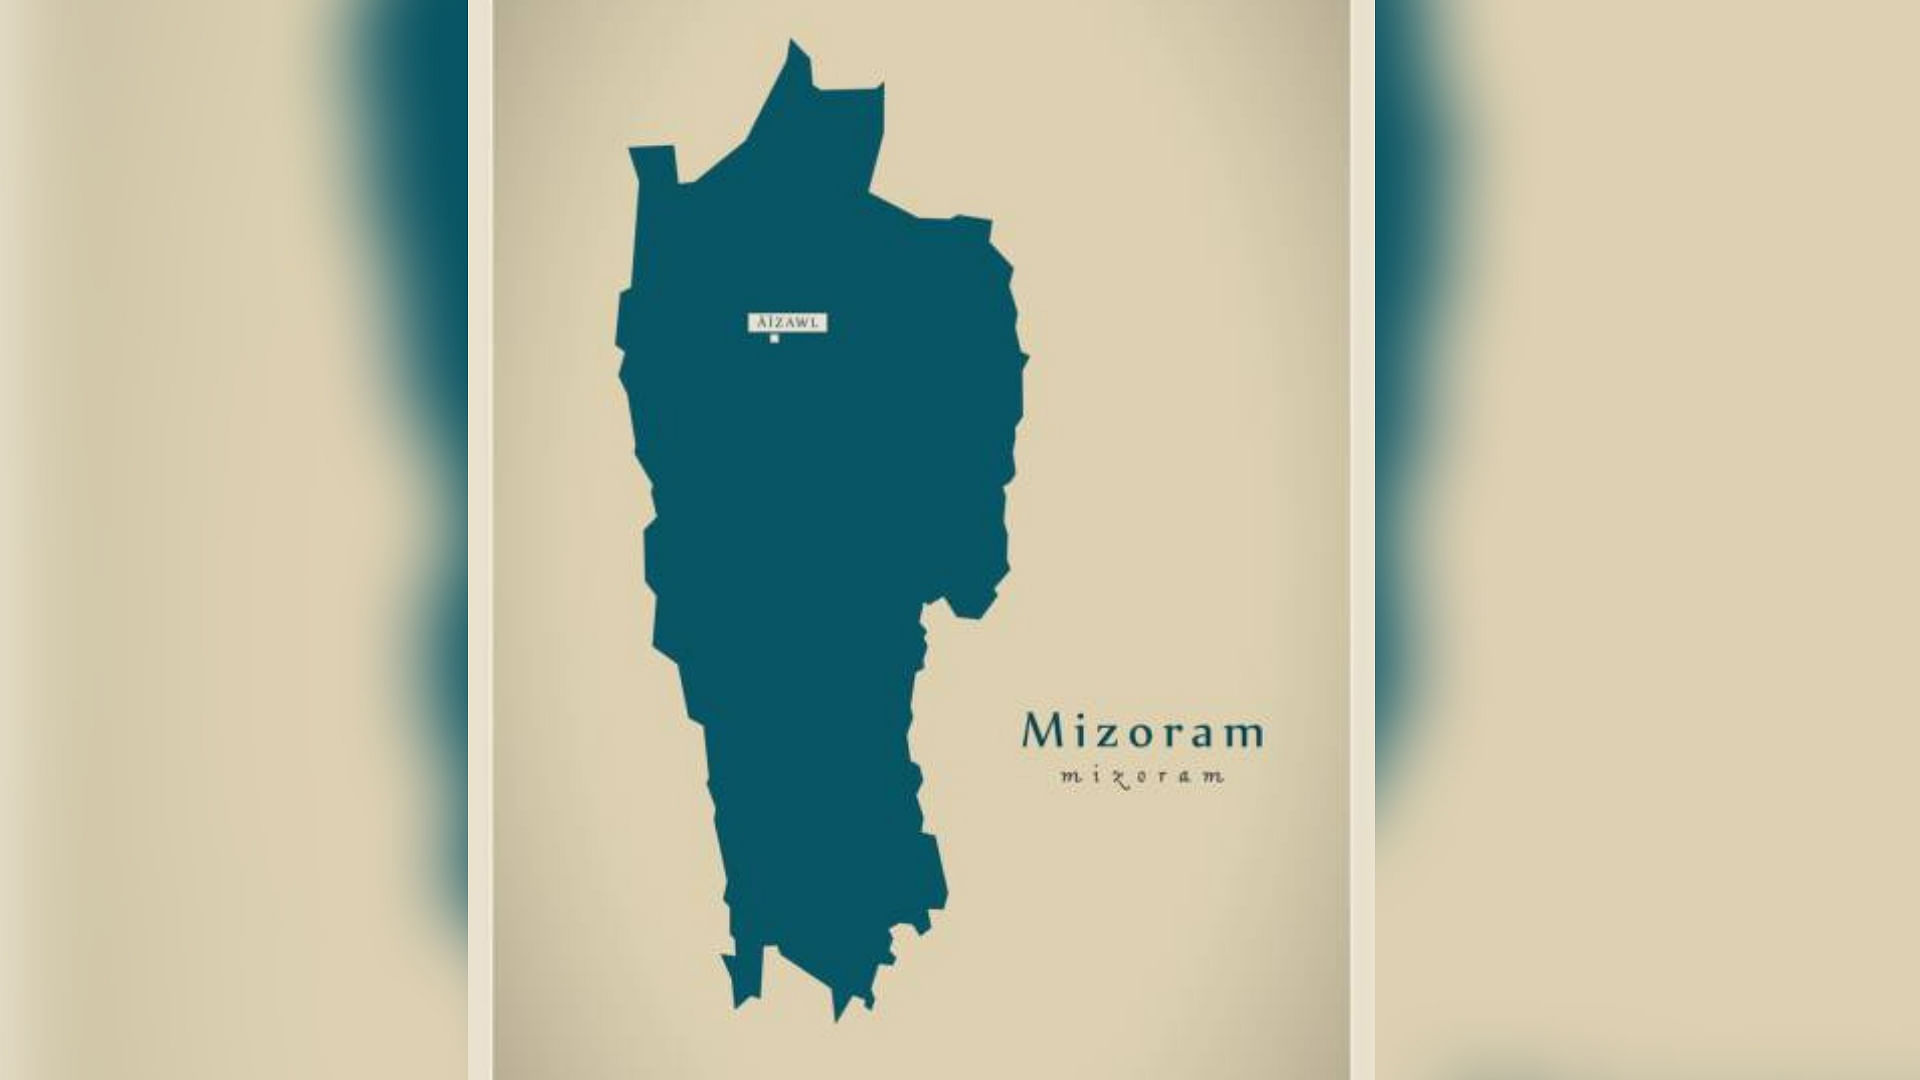 With about half as many voters as south Mumbai, Mizoram is one of India’s fastest-growing, healthiest (second) and most-literate states (third).